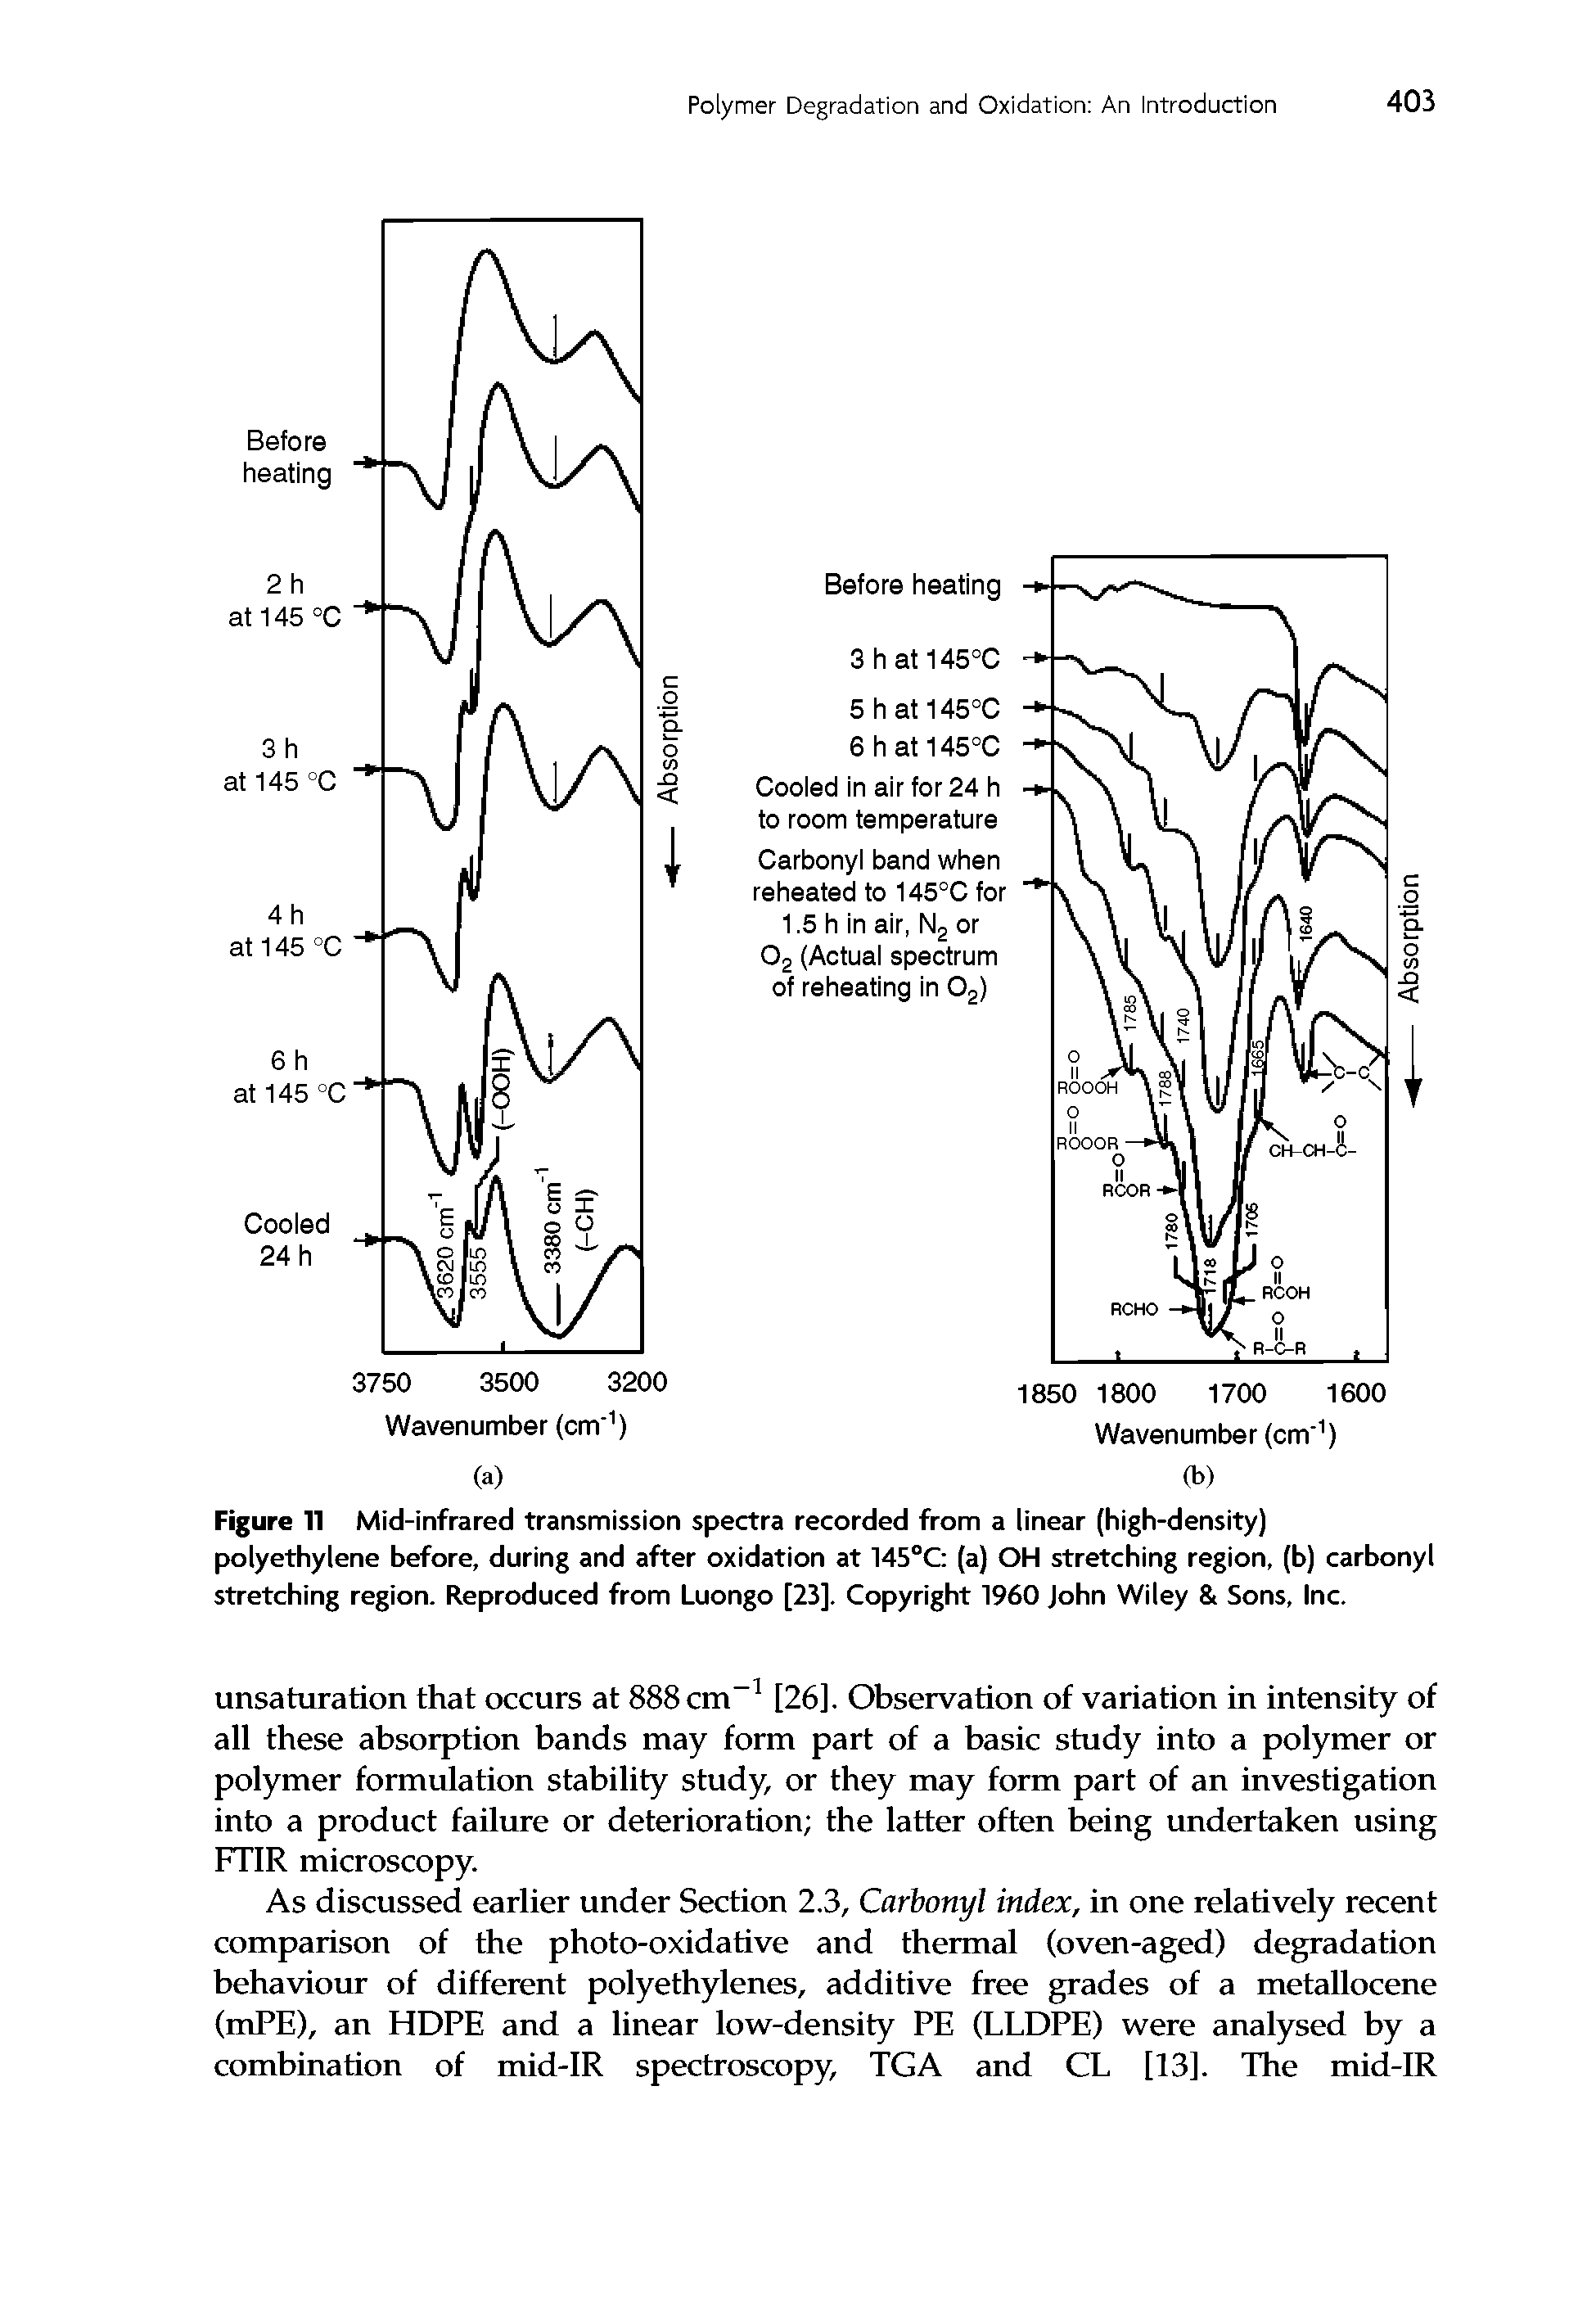 Figure 11 Mid-infrared transmission spectra recorded from a linear (high-density) polyethylene before, during and after oxidation at 145°C (a) OH stretching region, (b) carbonyl stretching region. Reproduced from Luongo [23]. Copyright 1960 John Wiley Sons, Inc.